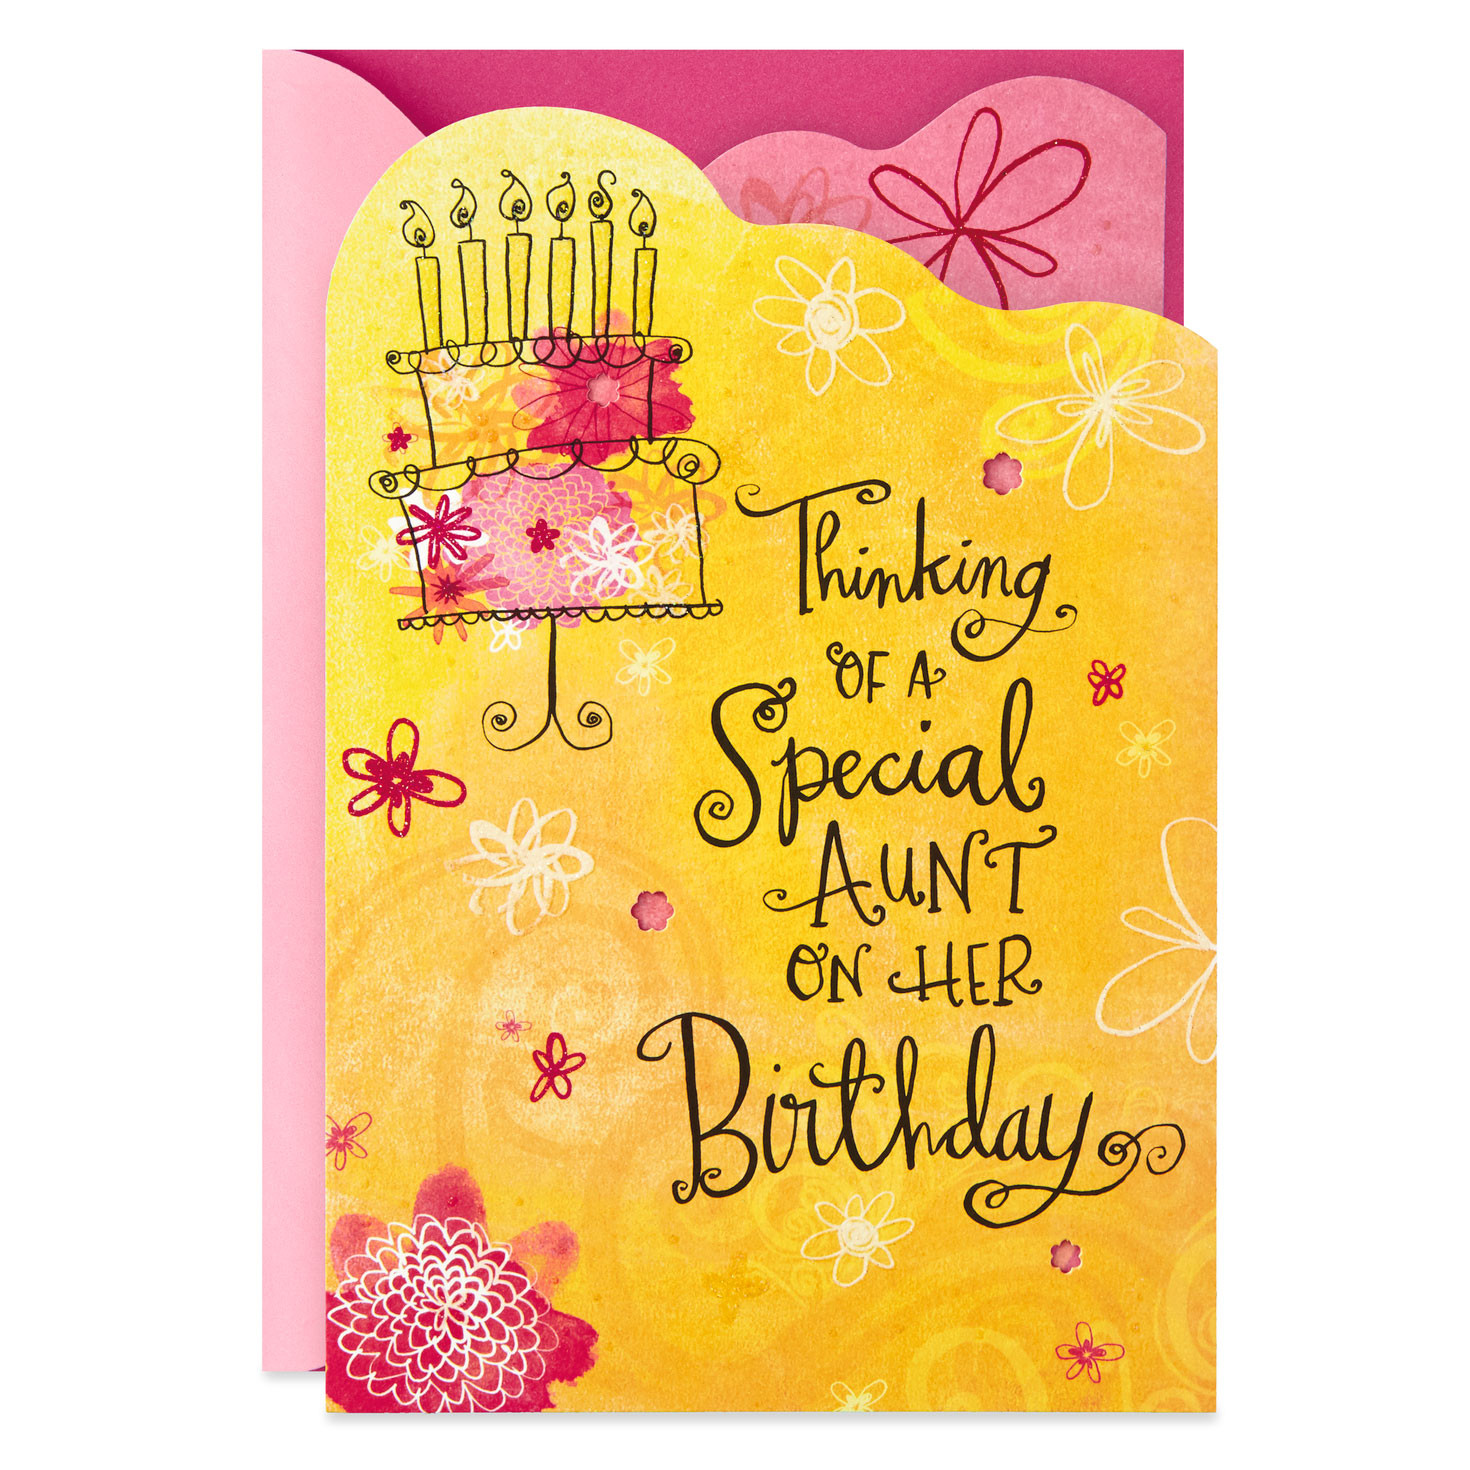 Birthday Cards For Aunts
 Thinking of You Birthday Card for Aunt Greeting Cards